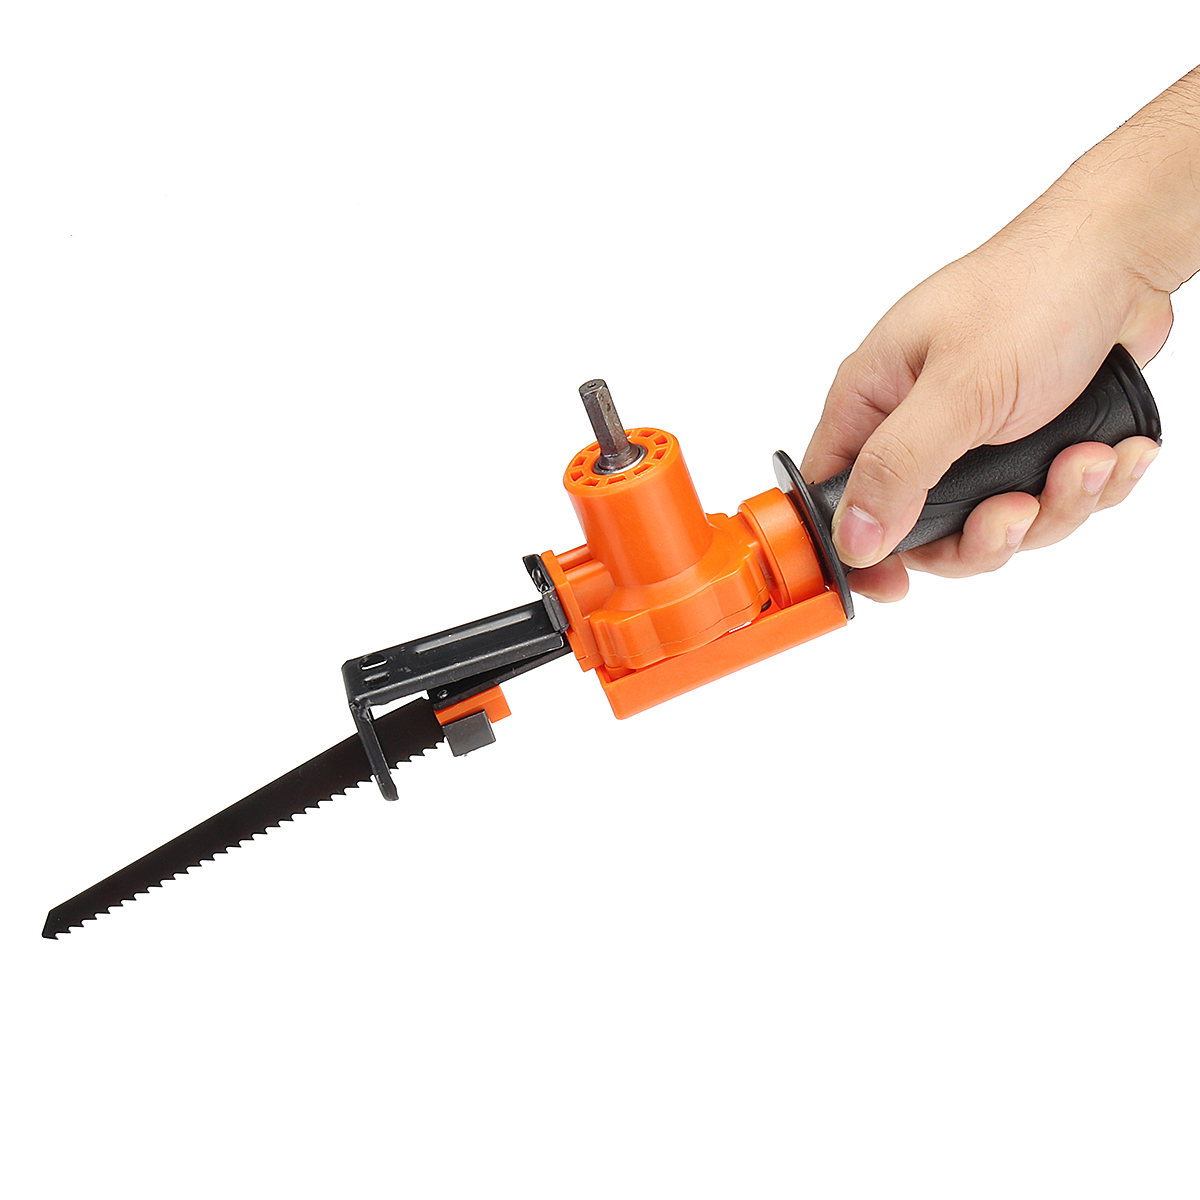 Reciprocating-Saw-Attachment-Adapter-Metal-Cutting-Tools-Electric-Drill-Attachment-2-Blades-1722798-3